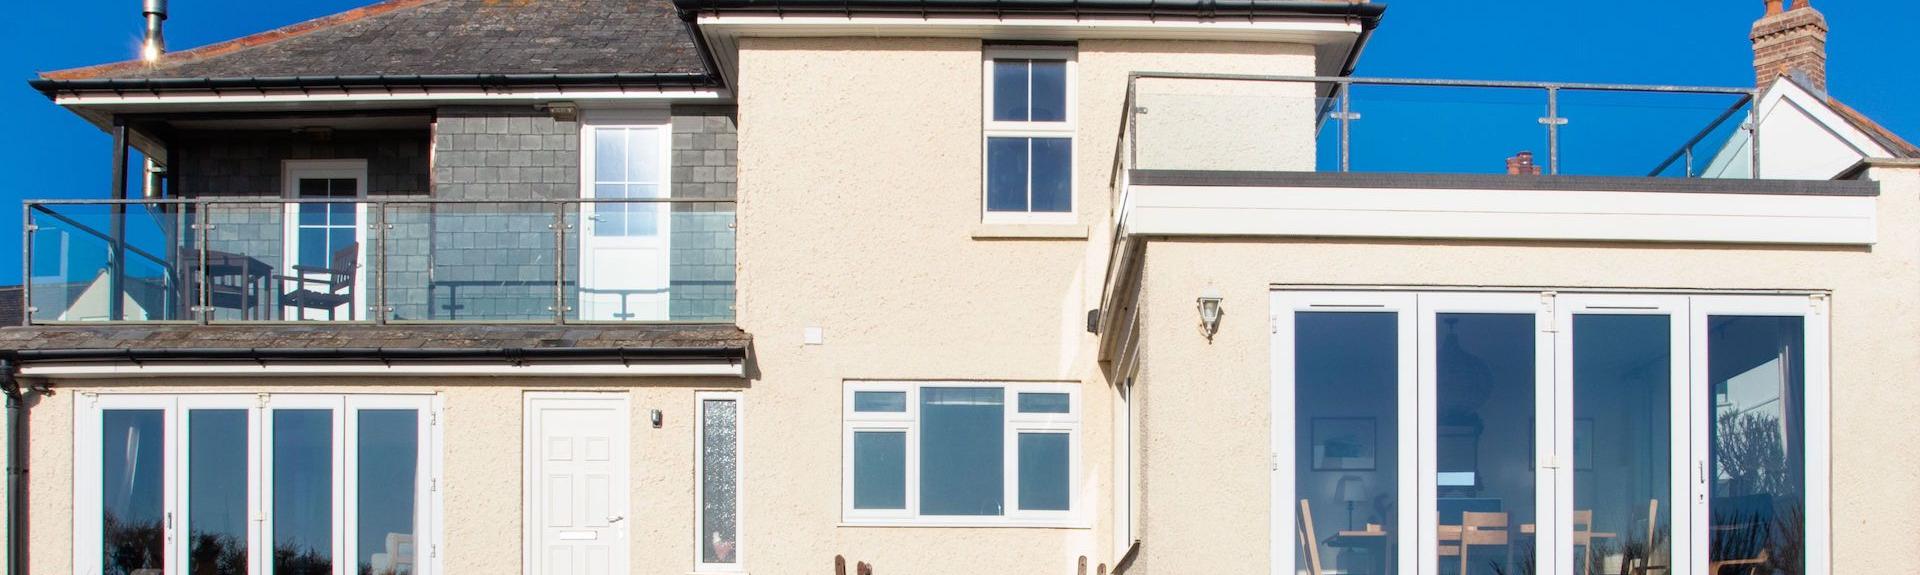 Large cottage with balcony and floor-to-ceiling French windows in Padstow.